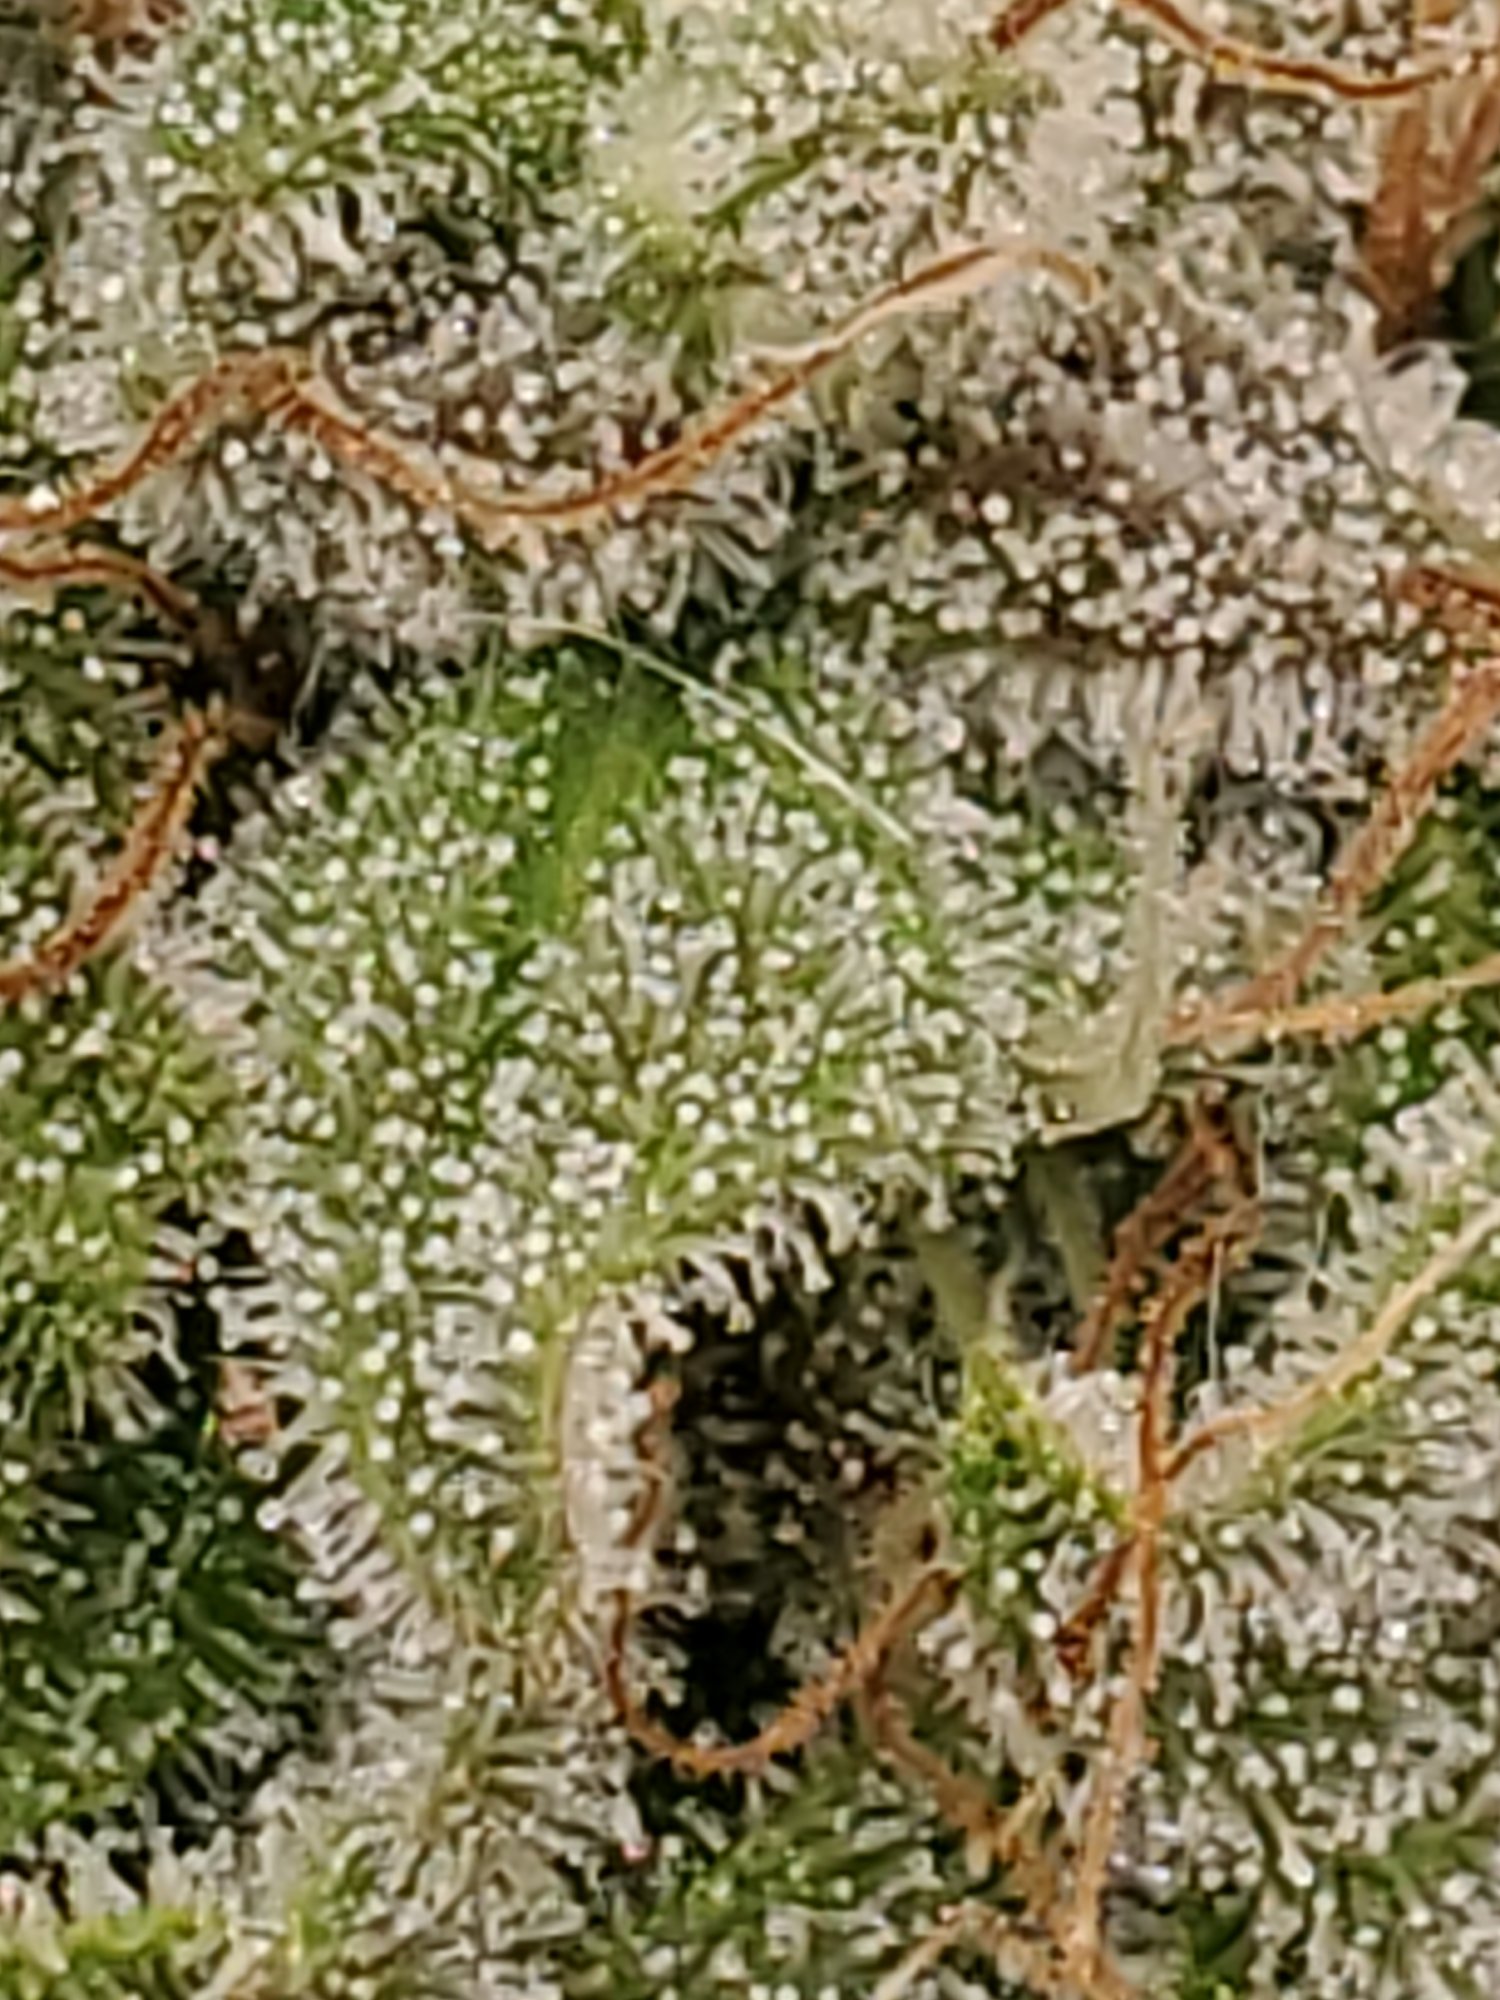 Trichomes are these cloudy or clear 4